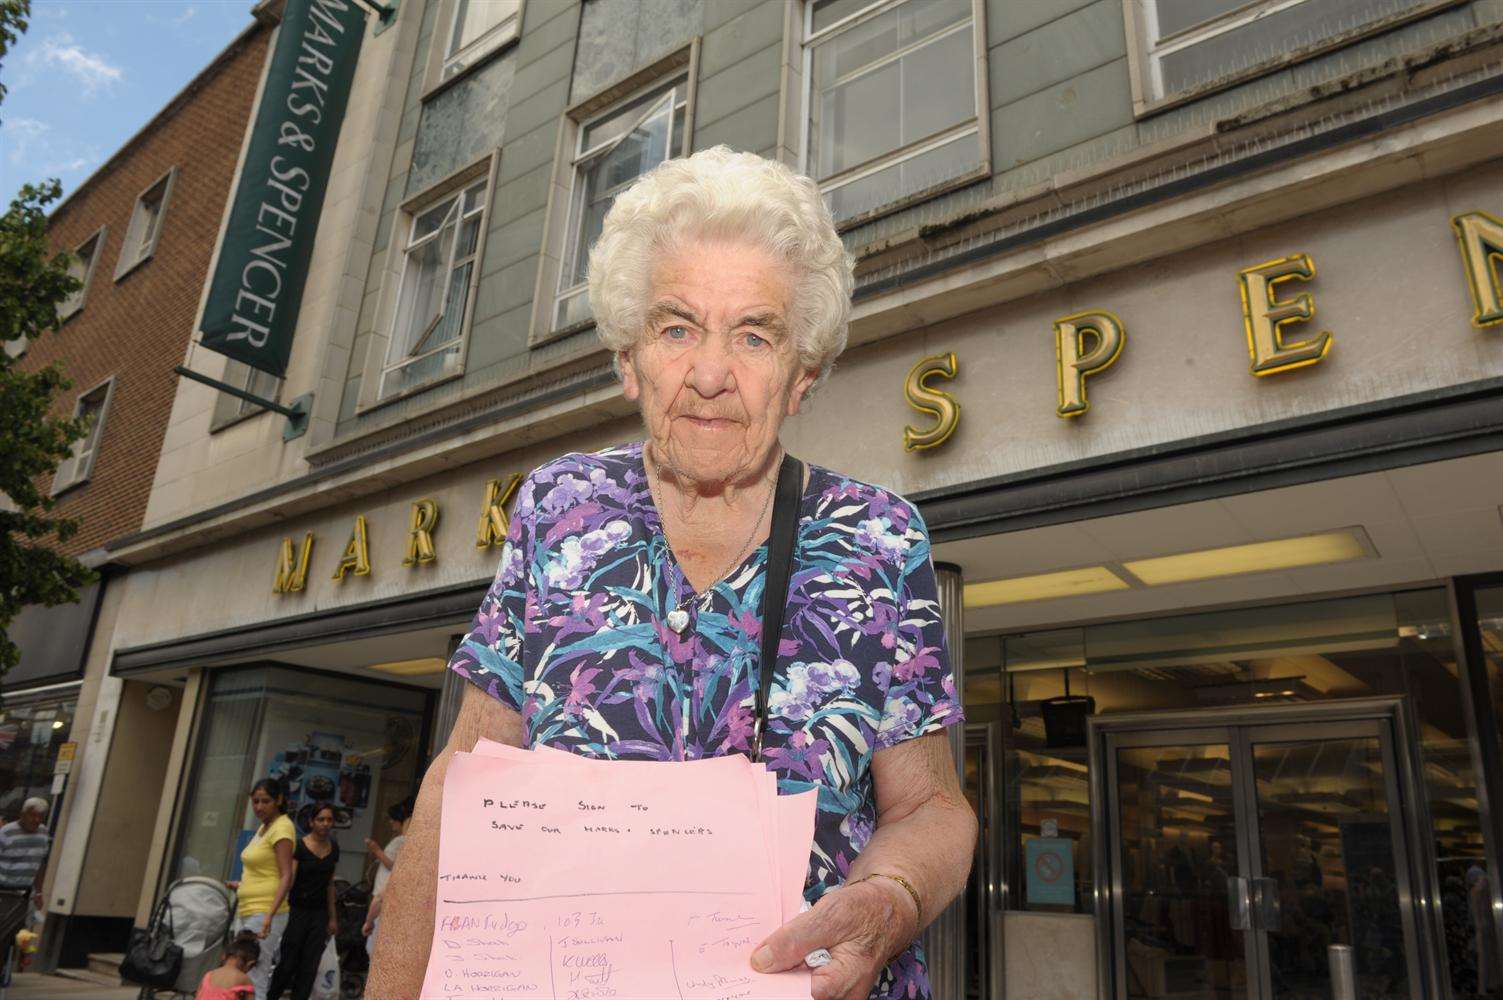 Vera Purll, 93, outside the Marks & Spencer store in Gravesend